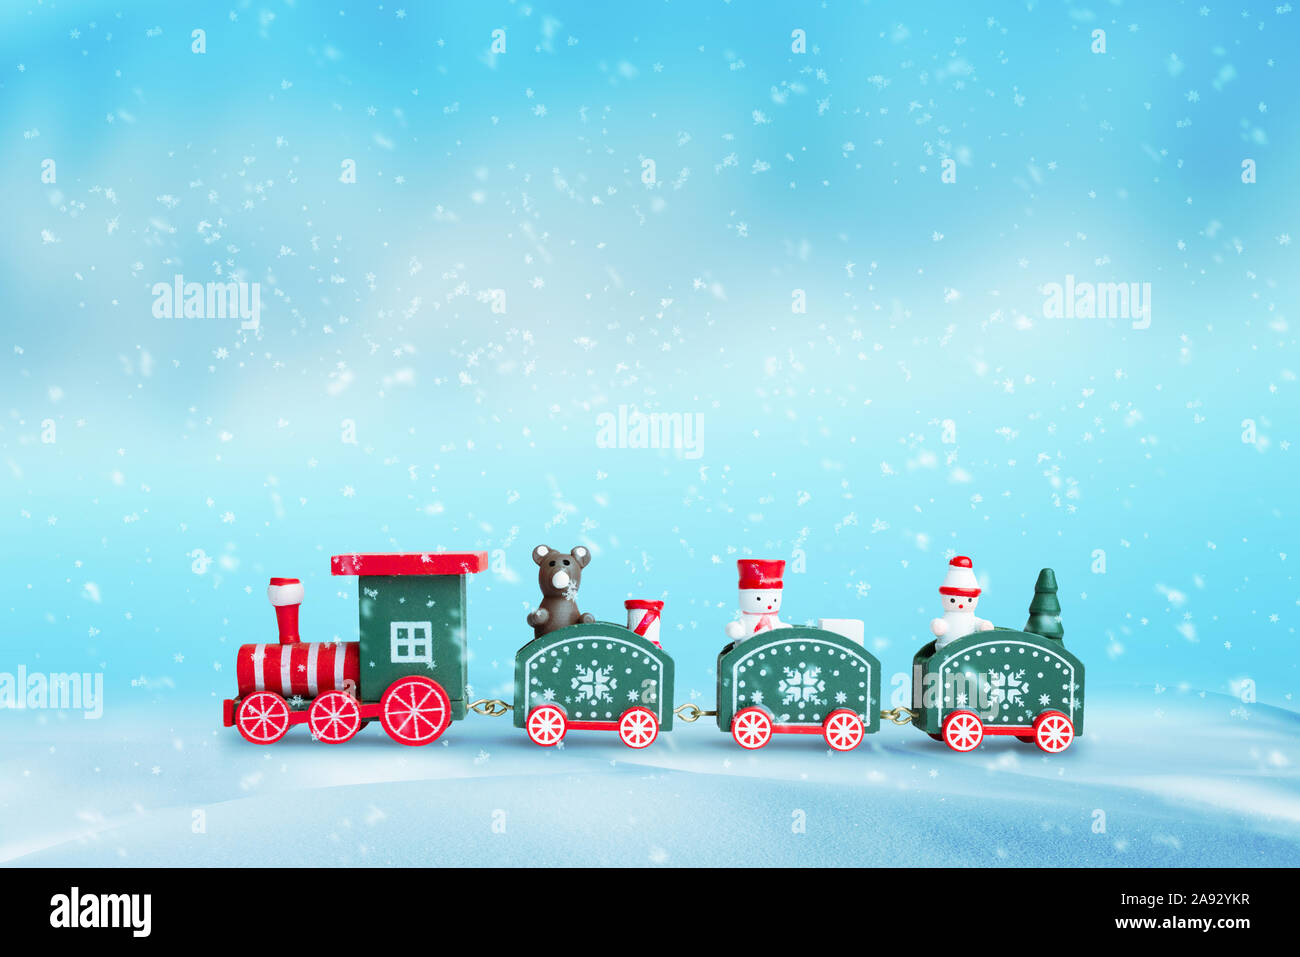 Cute train in the snow. Christmas; New Year background. Wooden toy with a bear and two snowshoes in wagons. Blue background. Stock Photo